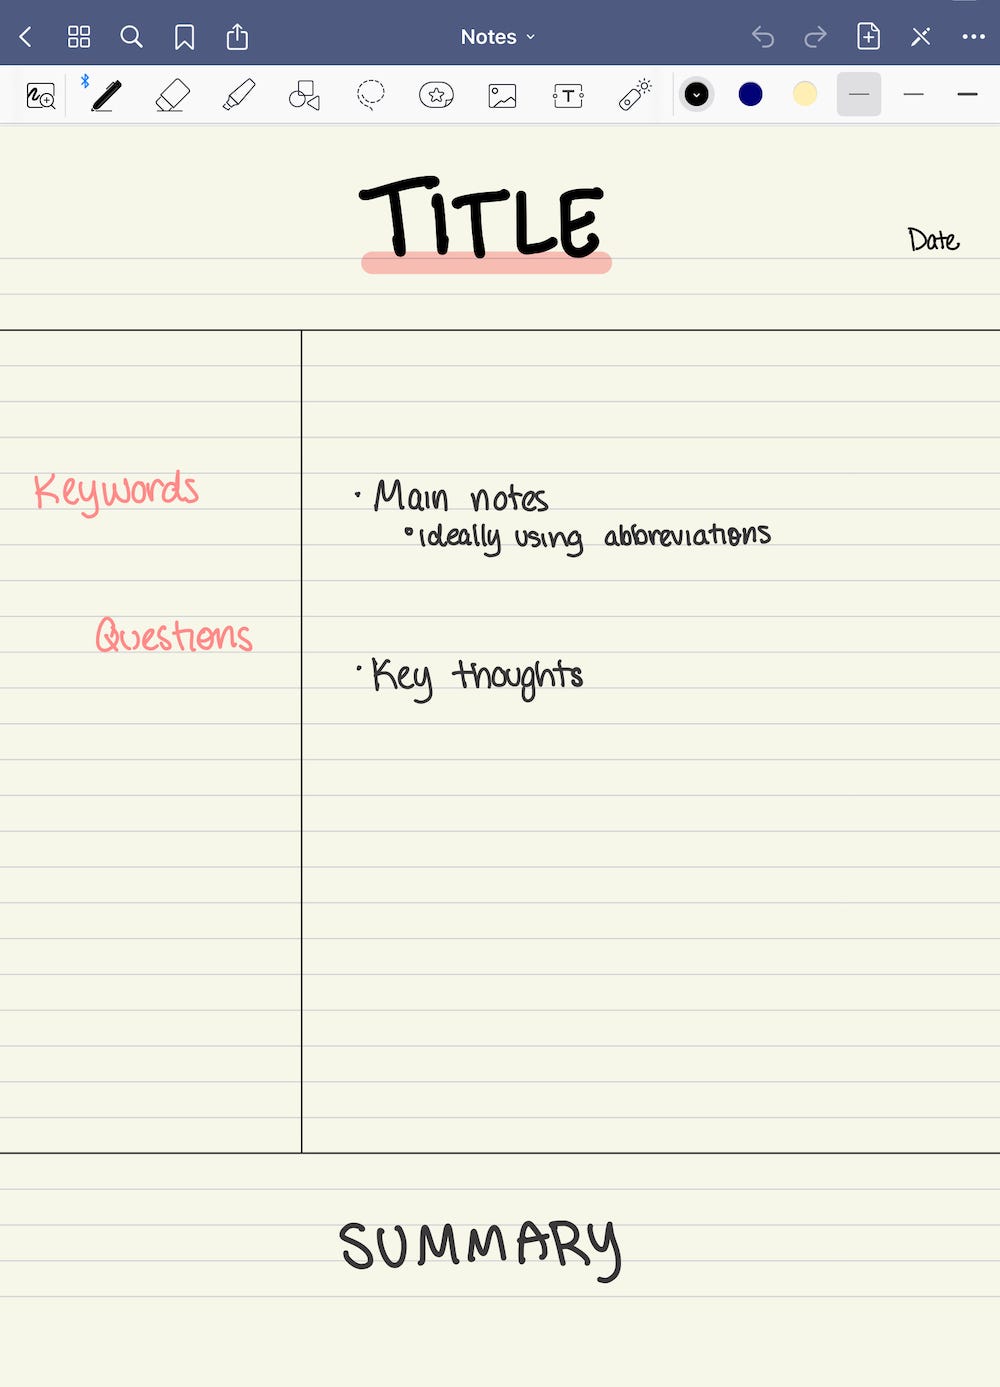 Cornell Note Taking — The Best Way To Take Notes Explained